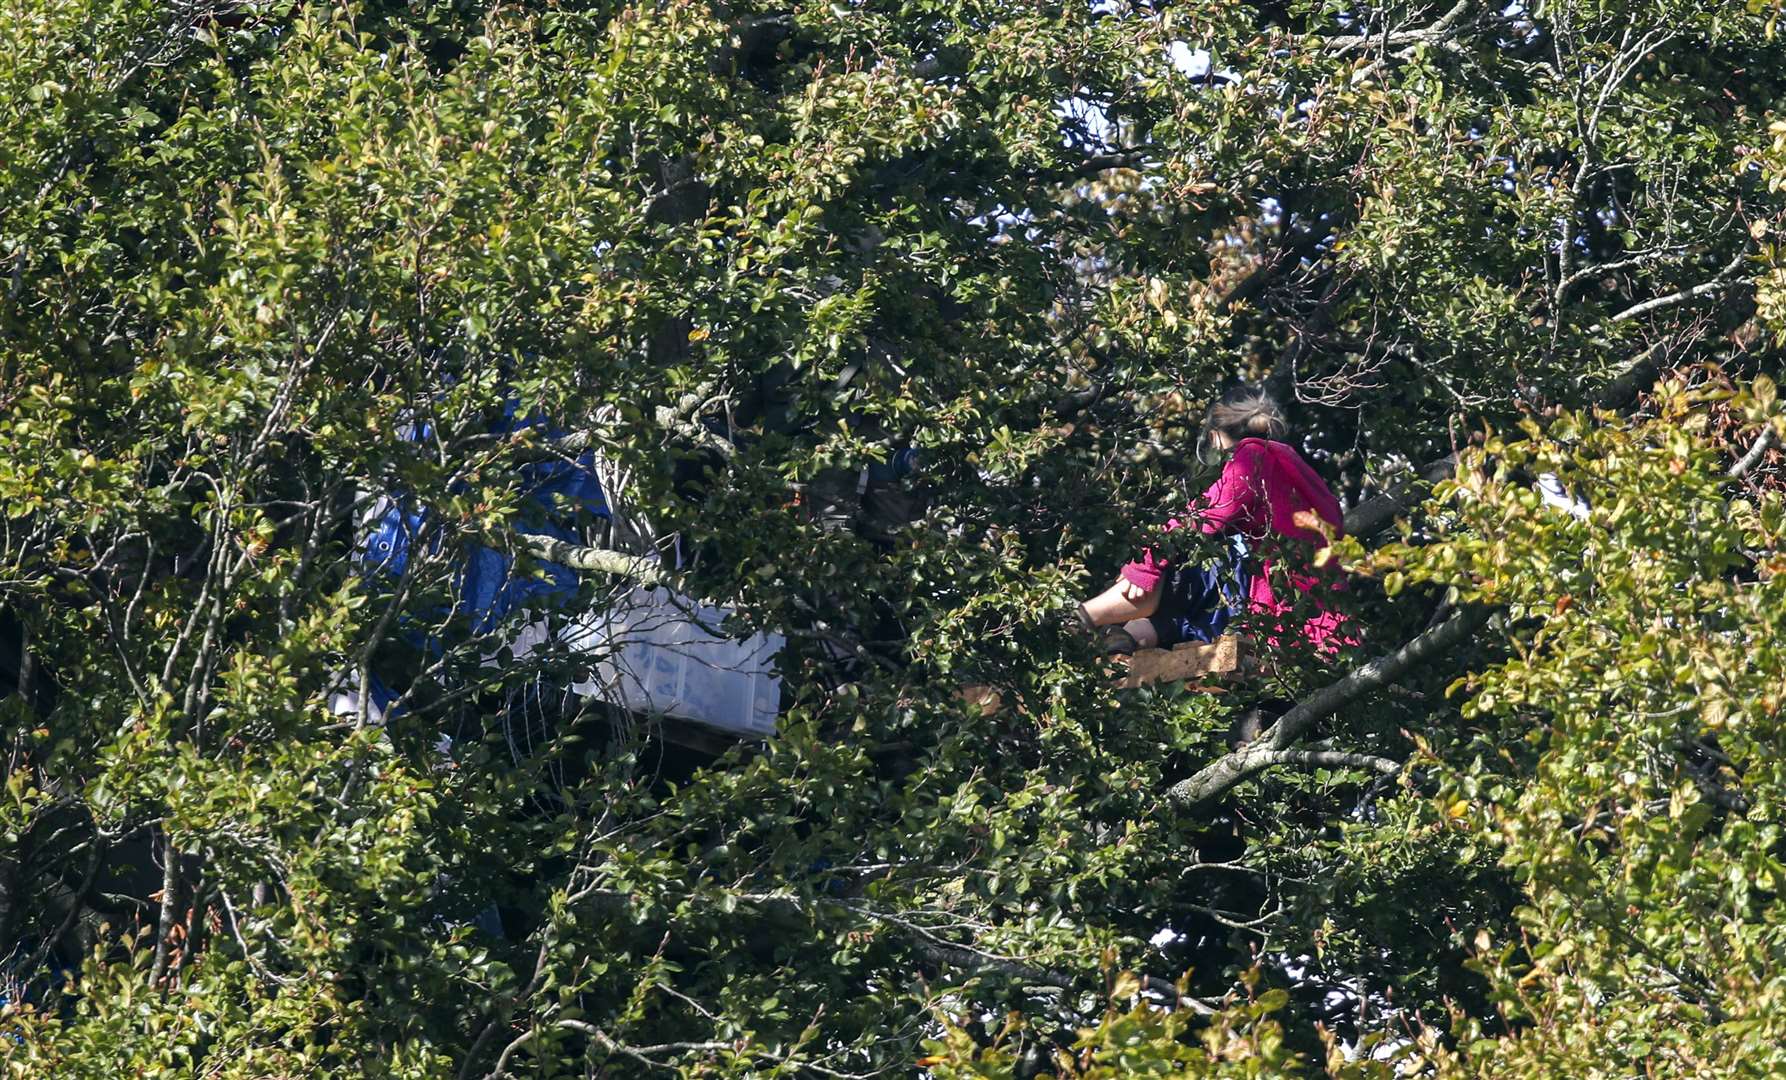 Protesters have vowed to stay in the trees for as long as possible (Steve Parsons/PA)